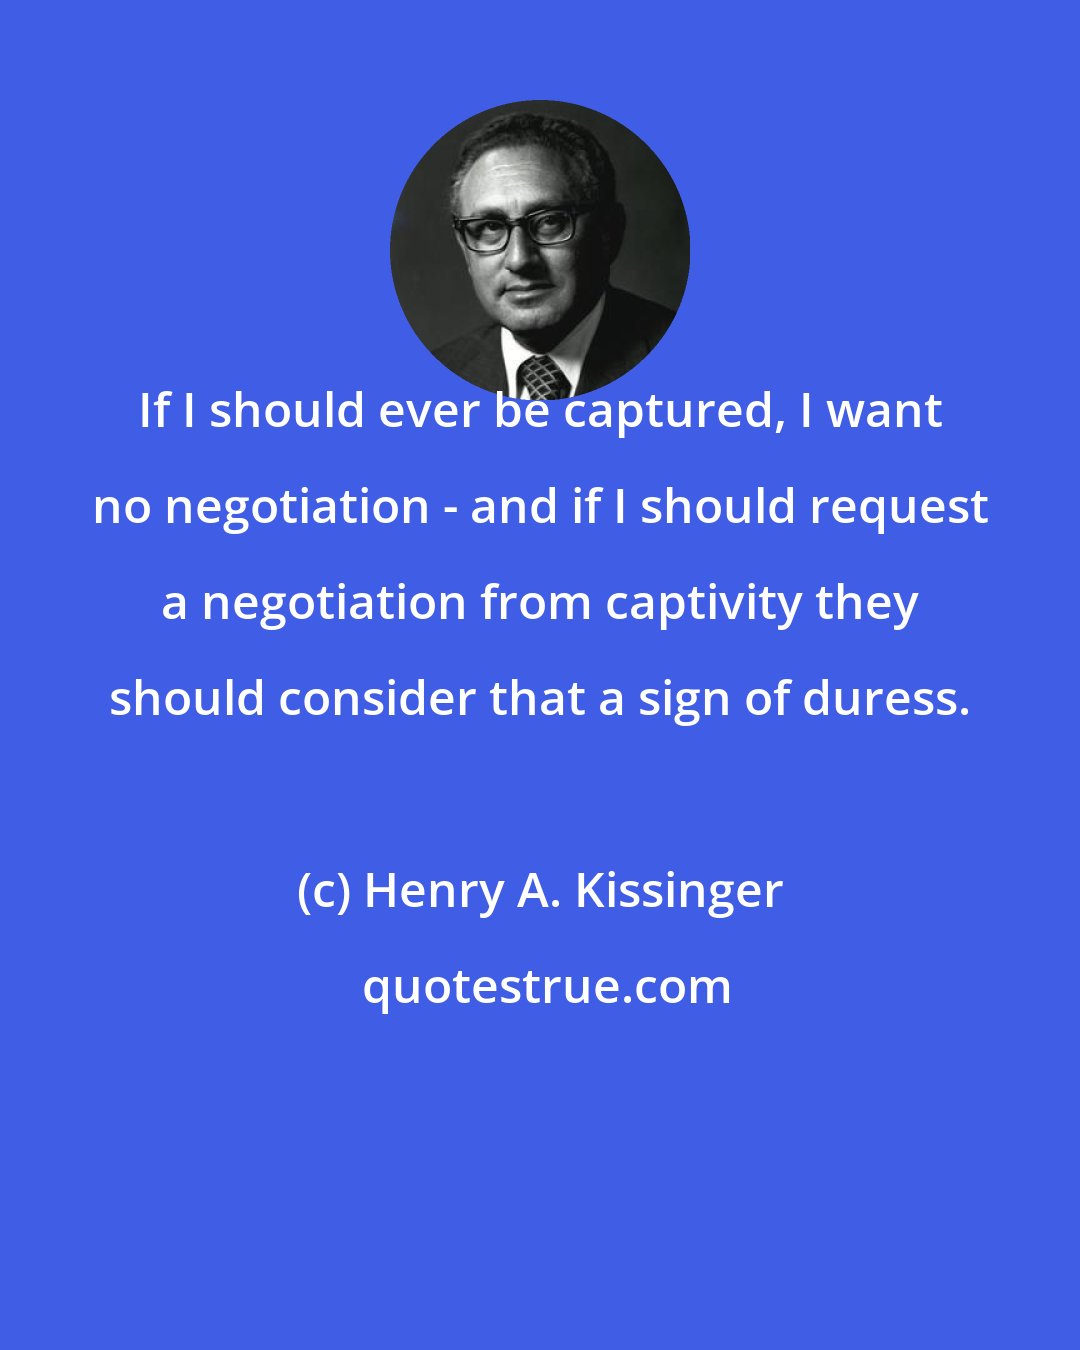 Henry A. Kissinger: If I should ever be captured, I want no negotiation - and if I should request a negotiation from captivity they should consider that a sign of duress.